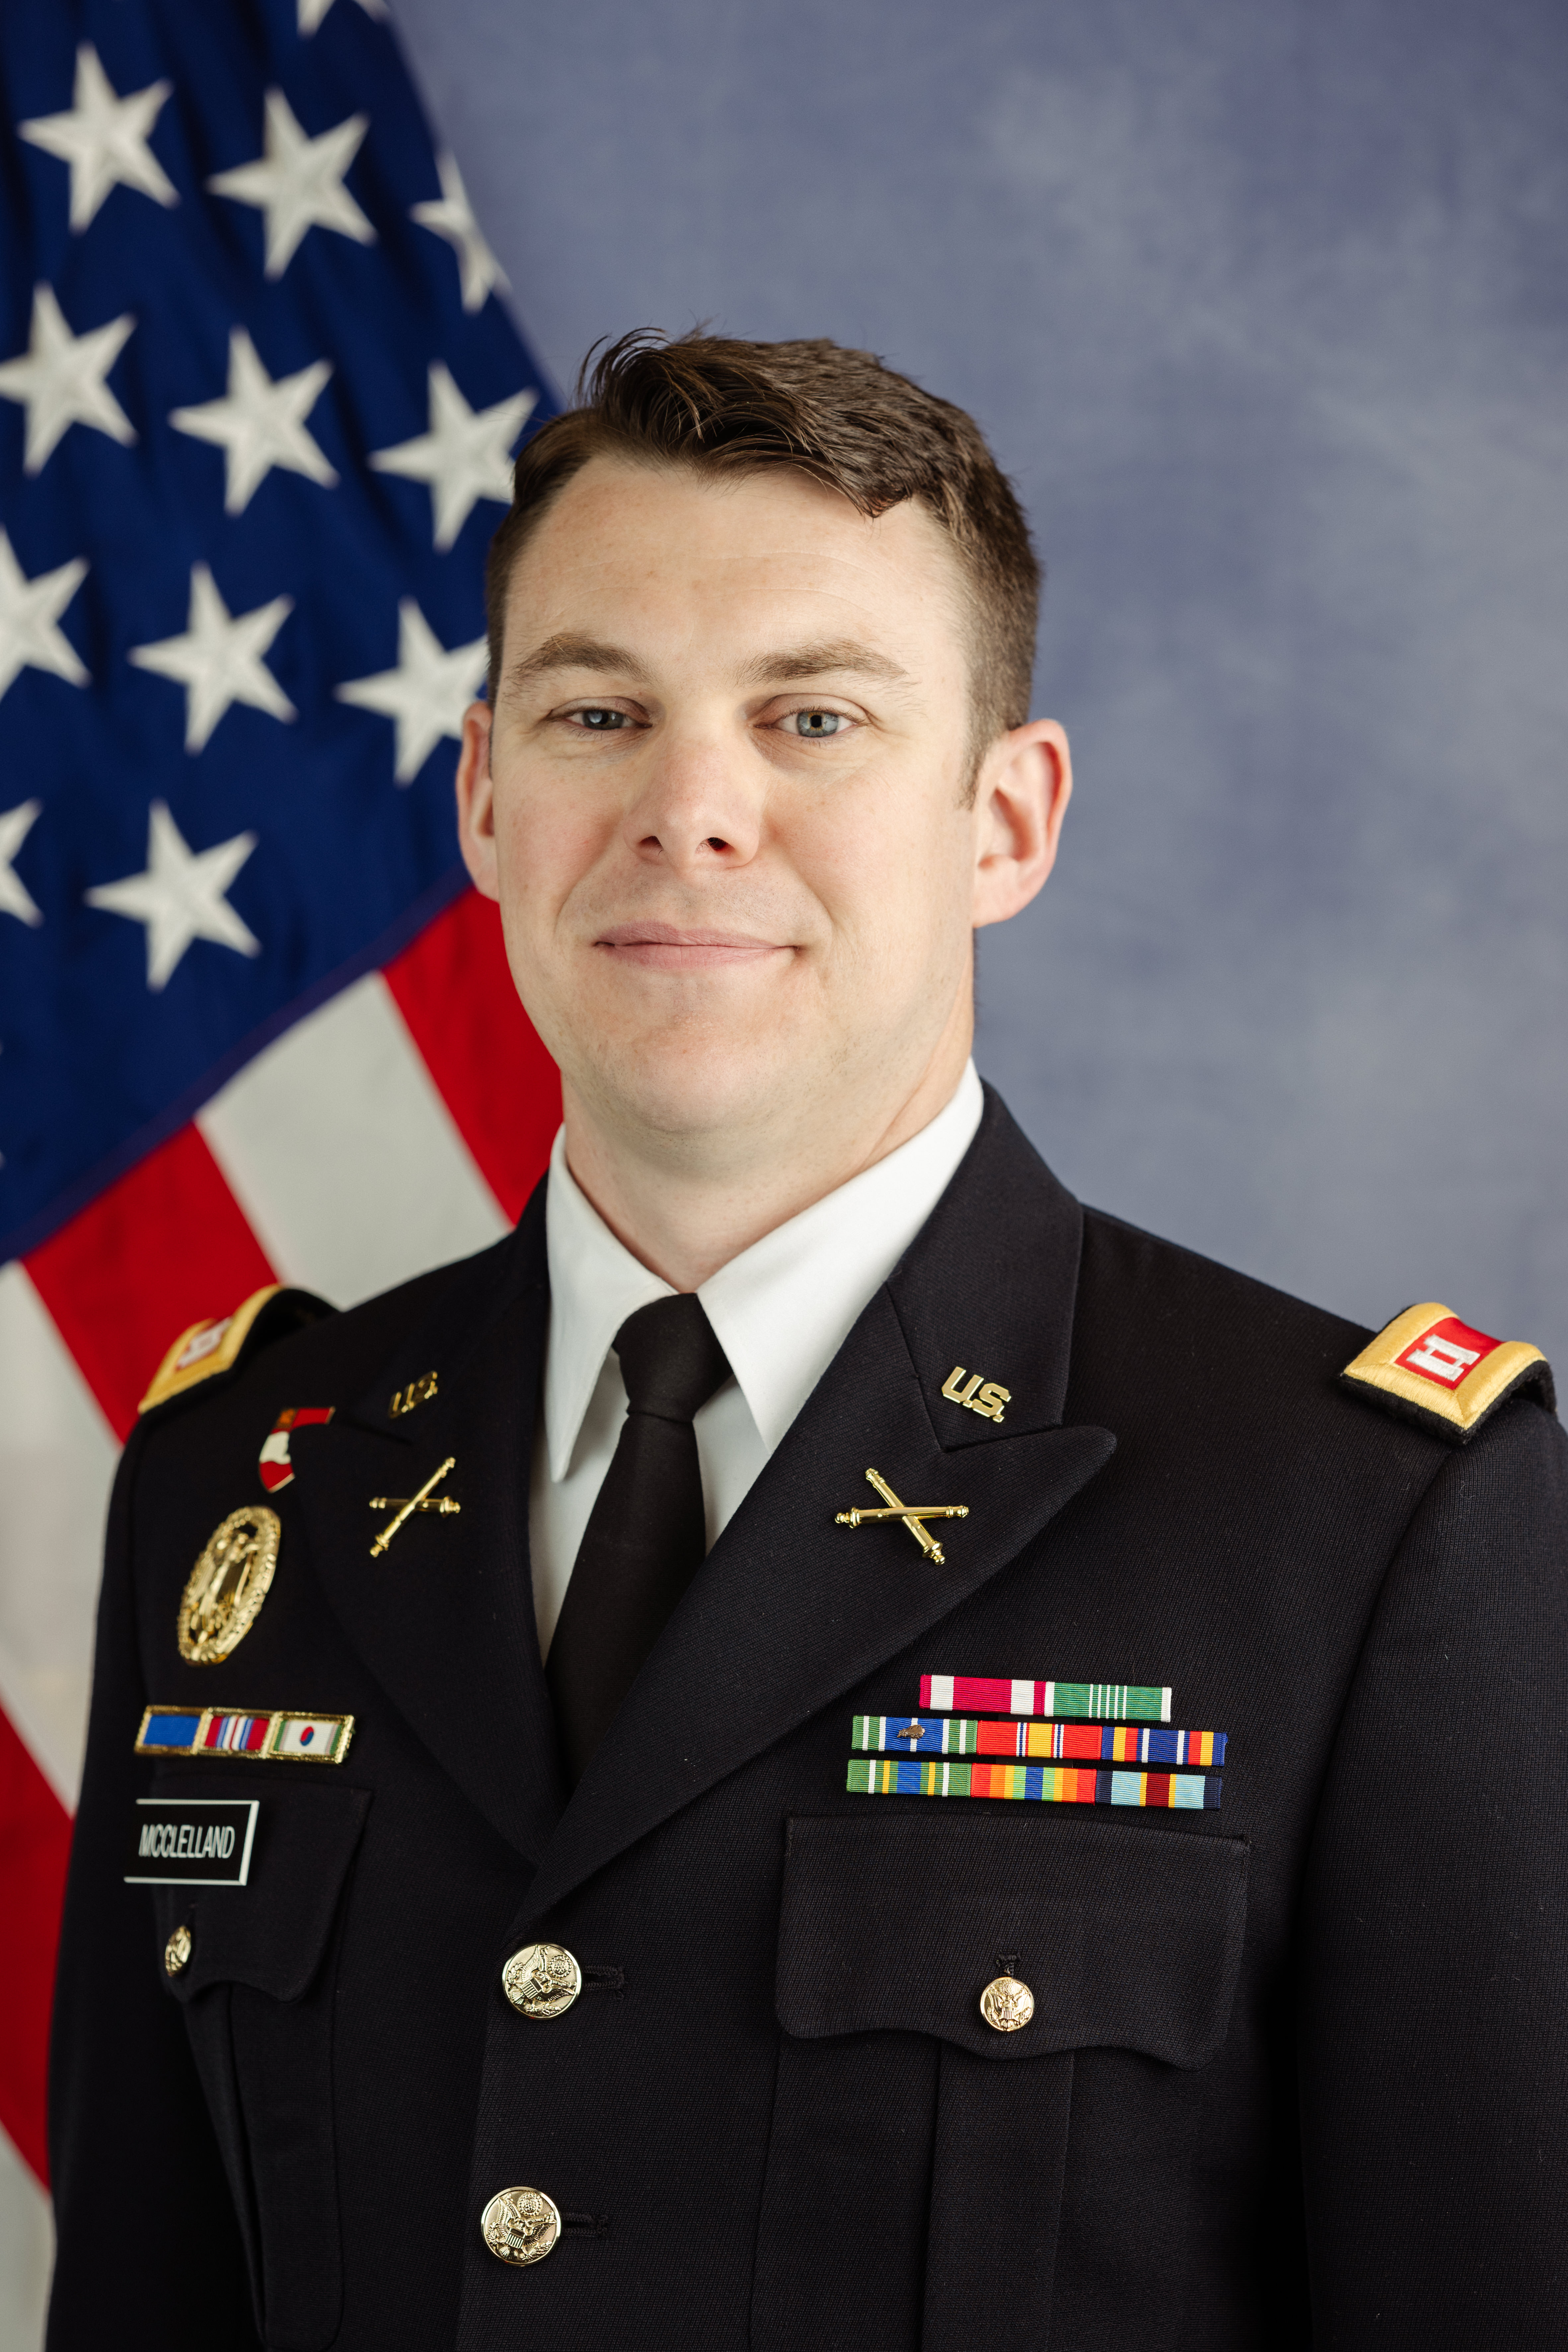 Image of CPT McClelland